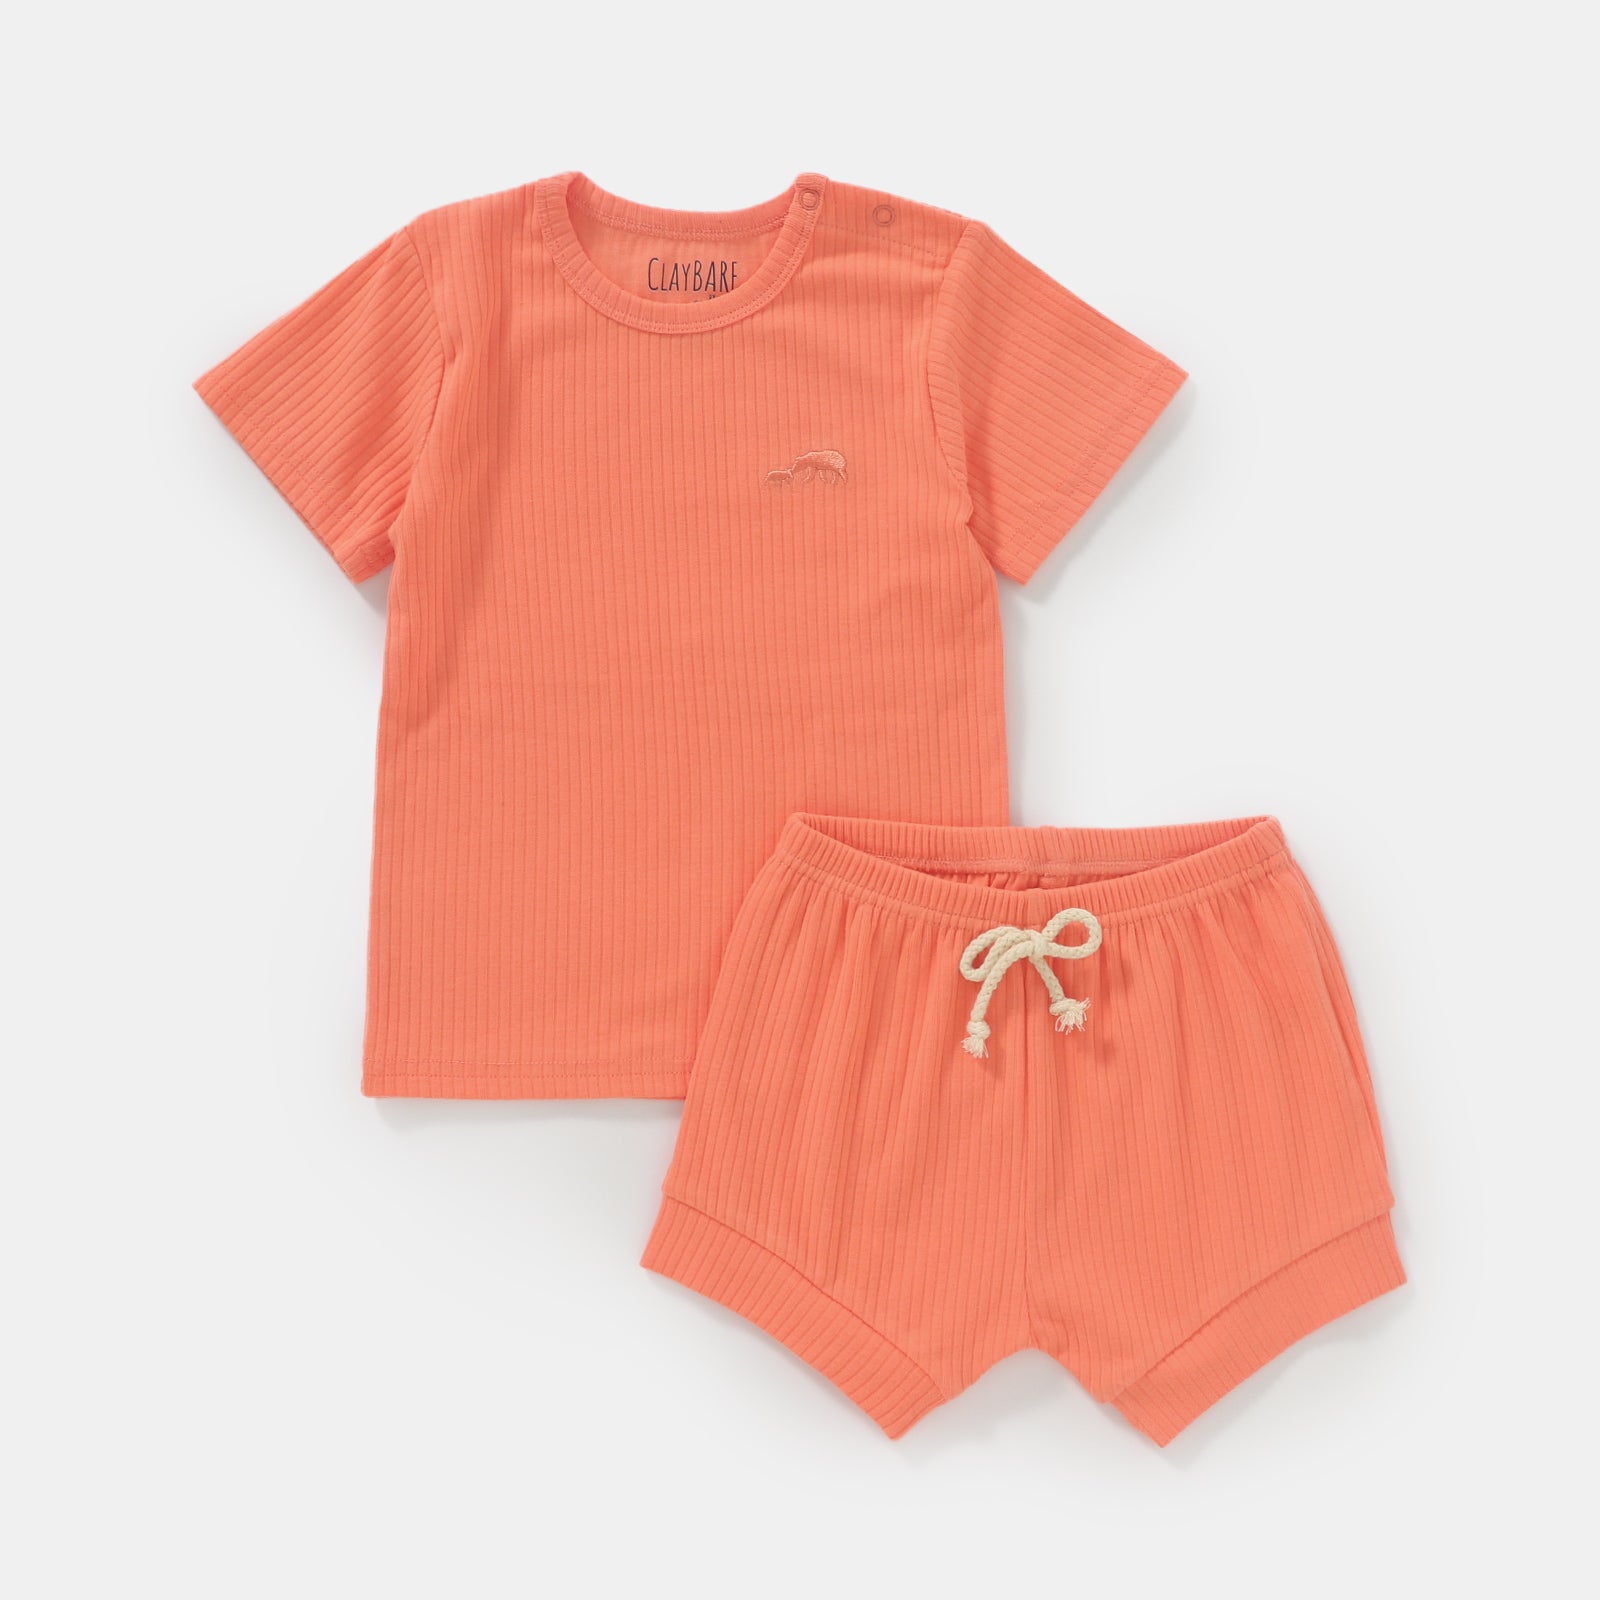 Peach Ribbed Short Sleeve Top (Top Only)